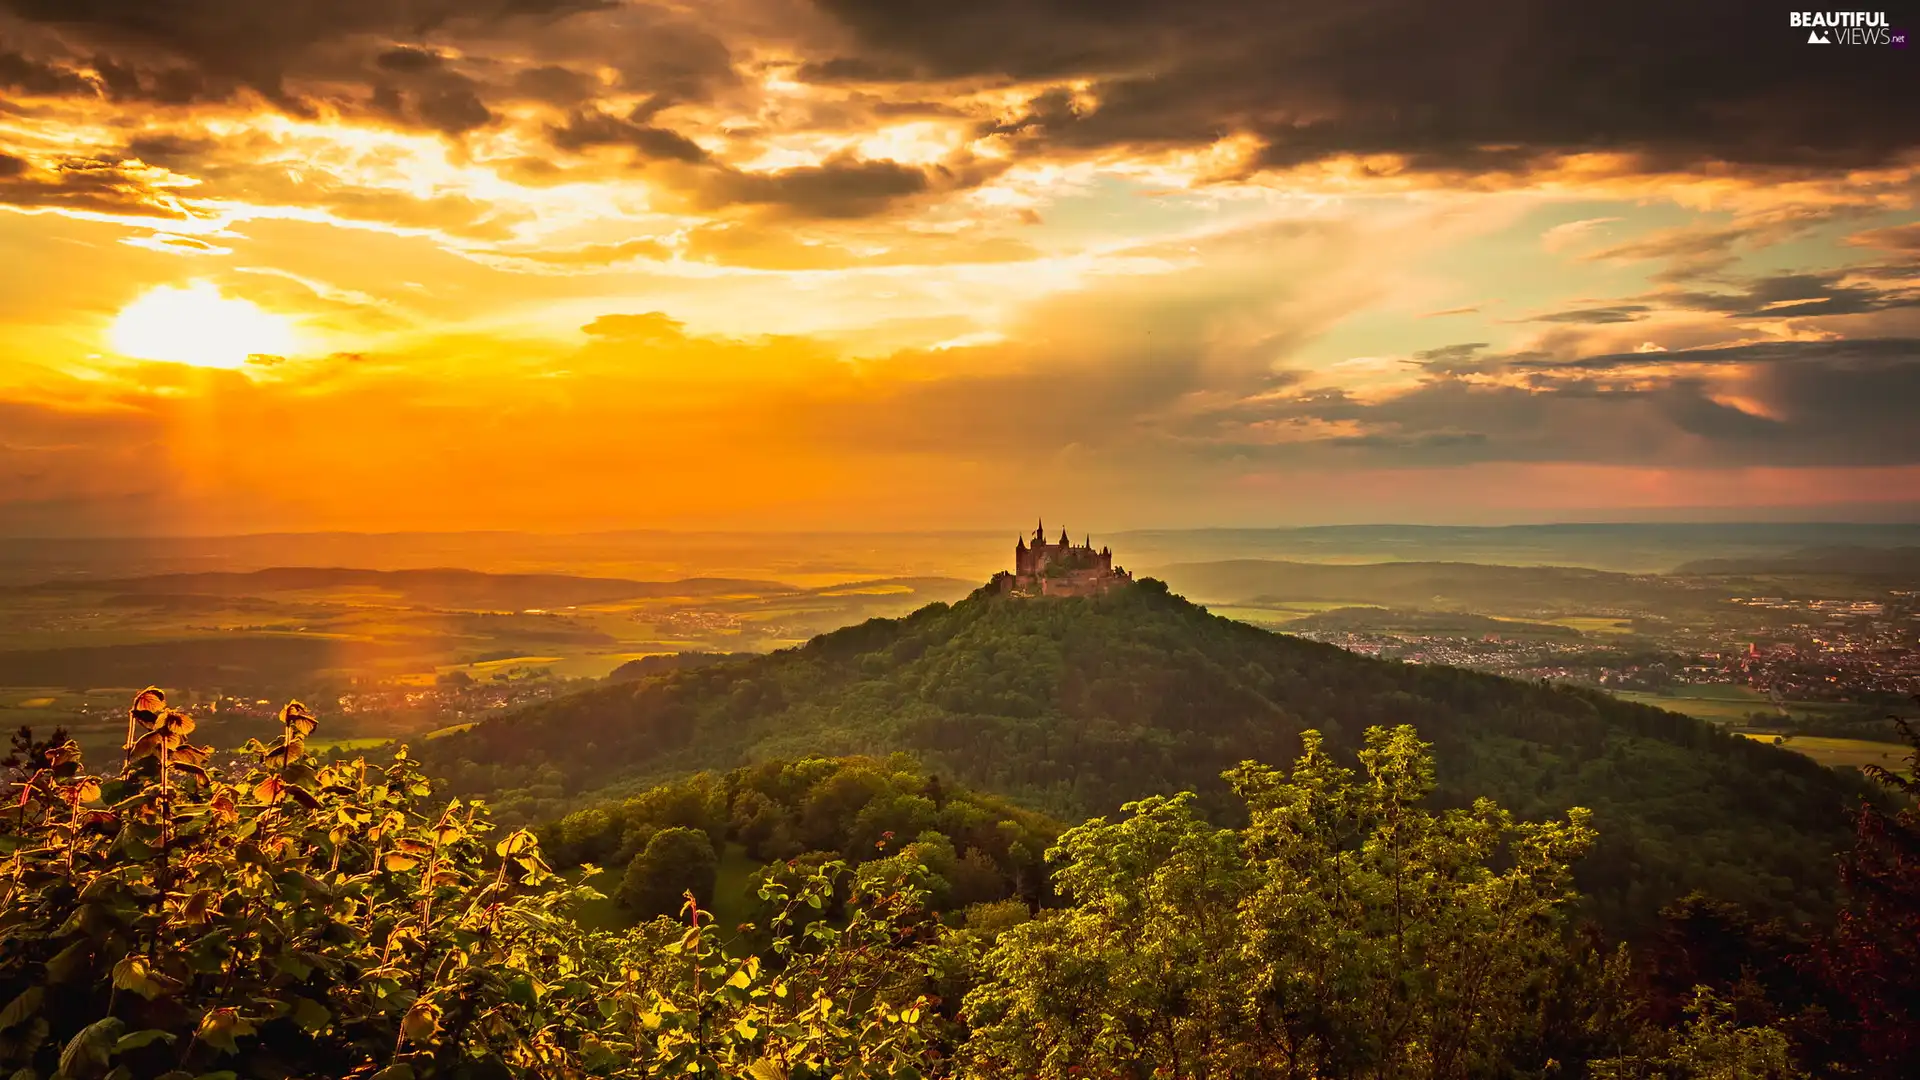 viewes, Hohenzollern Mountain, viewes, trees, The Hills, Germany, Baden-Württemberg, trees, Hohenzollern Castle, Great Sunsets, clouds